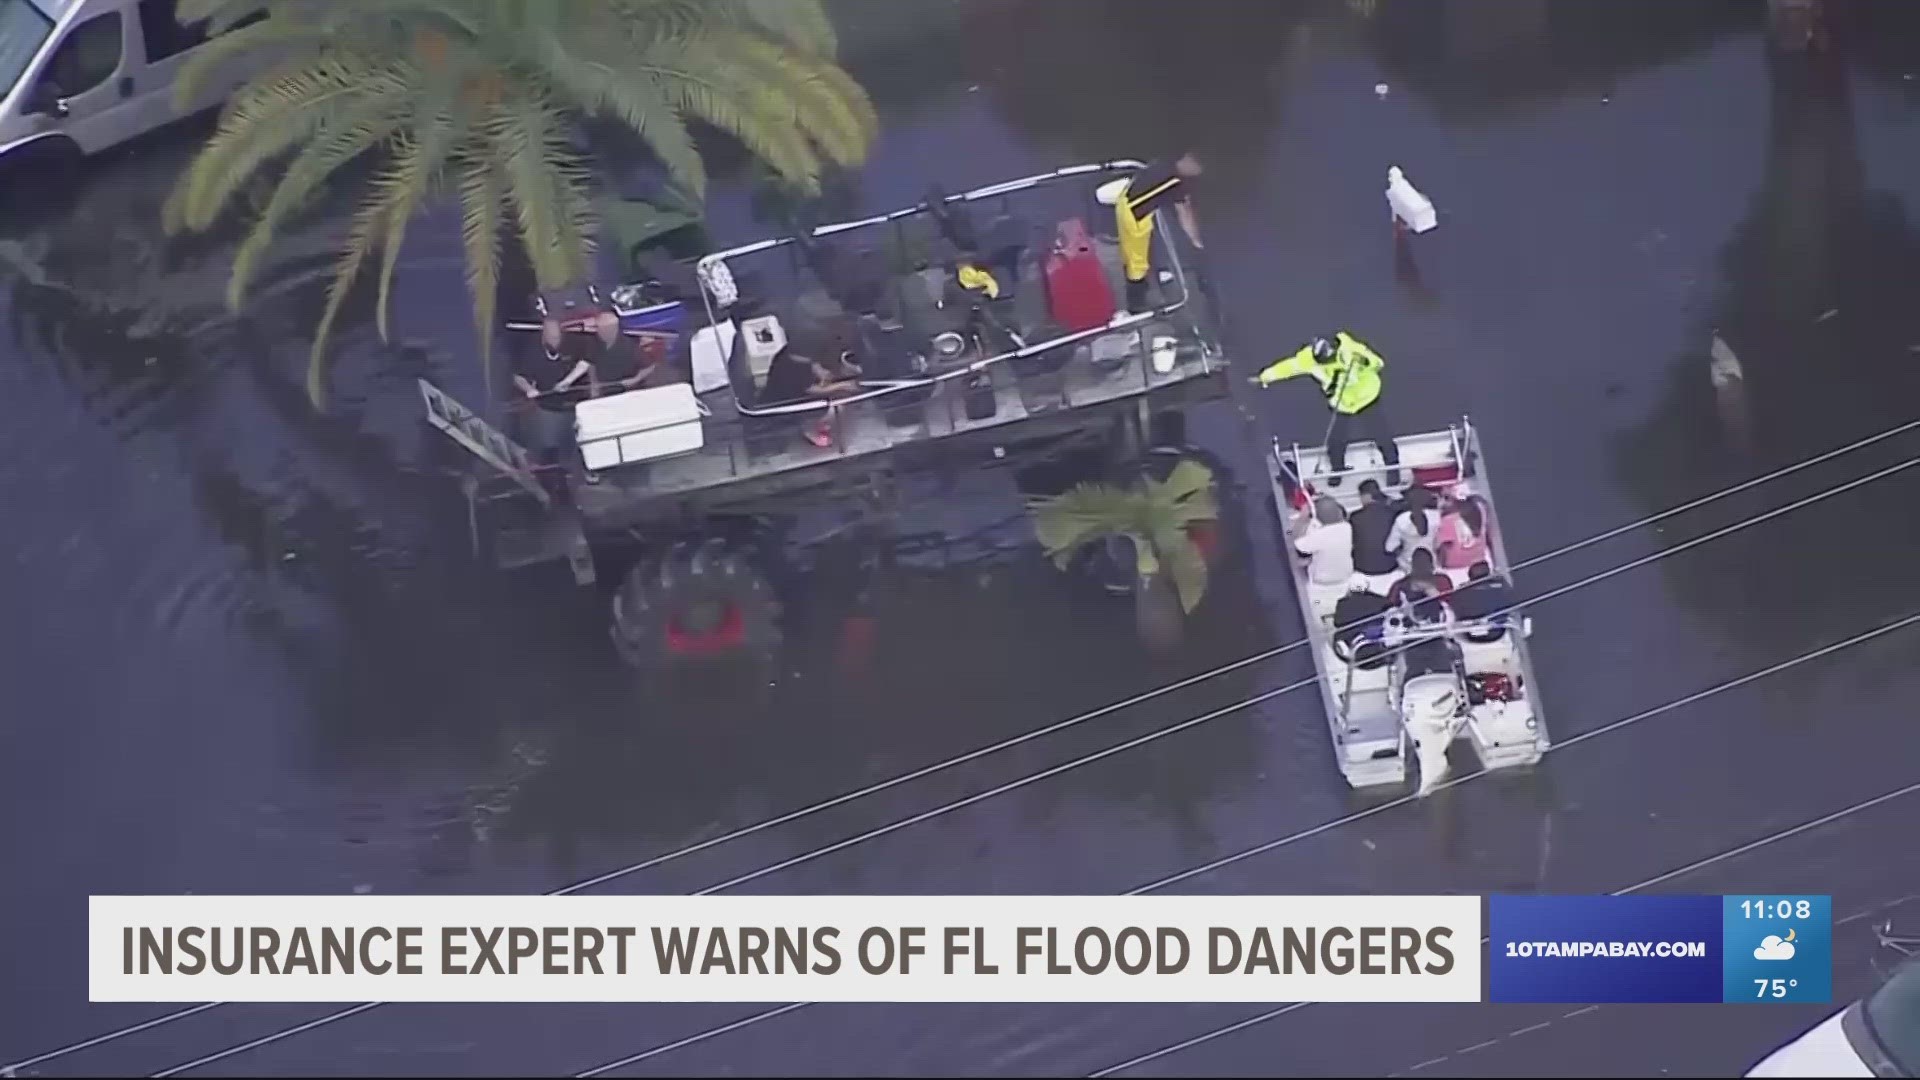 Southwest Florida is finally drying out after major flooding shut down airports and put cars underwater.